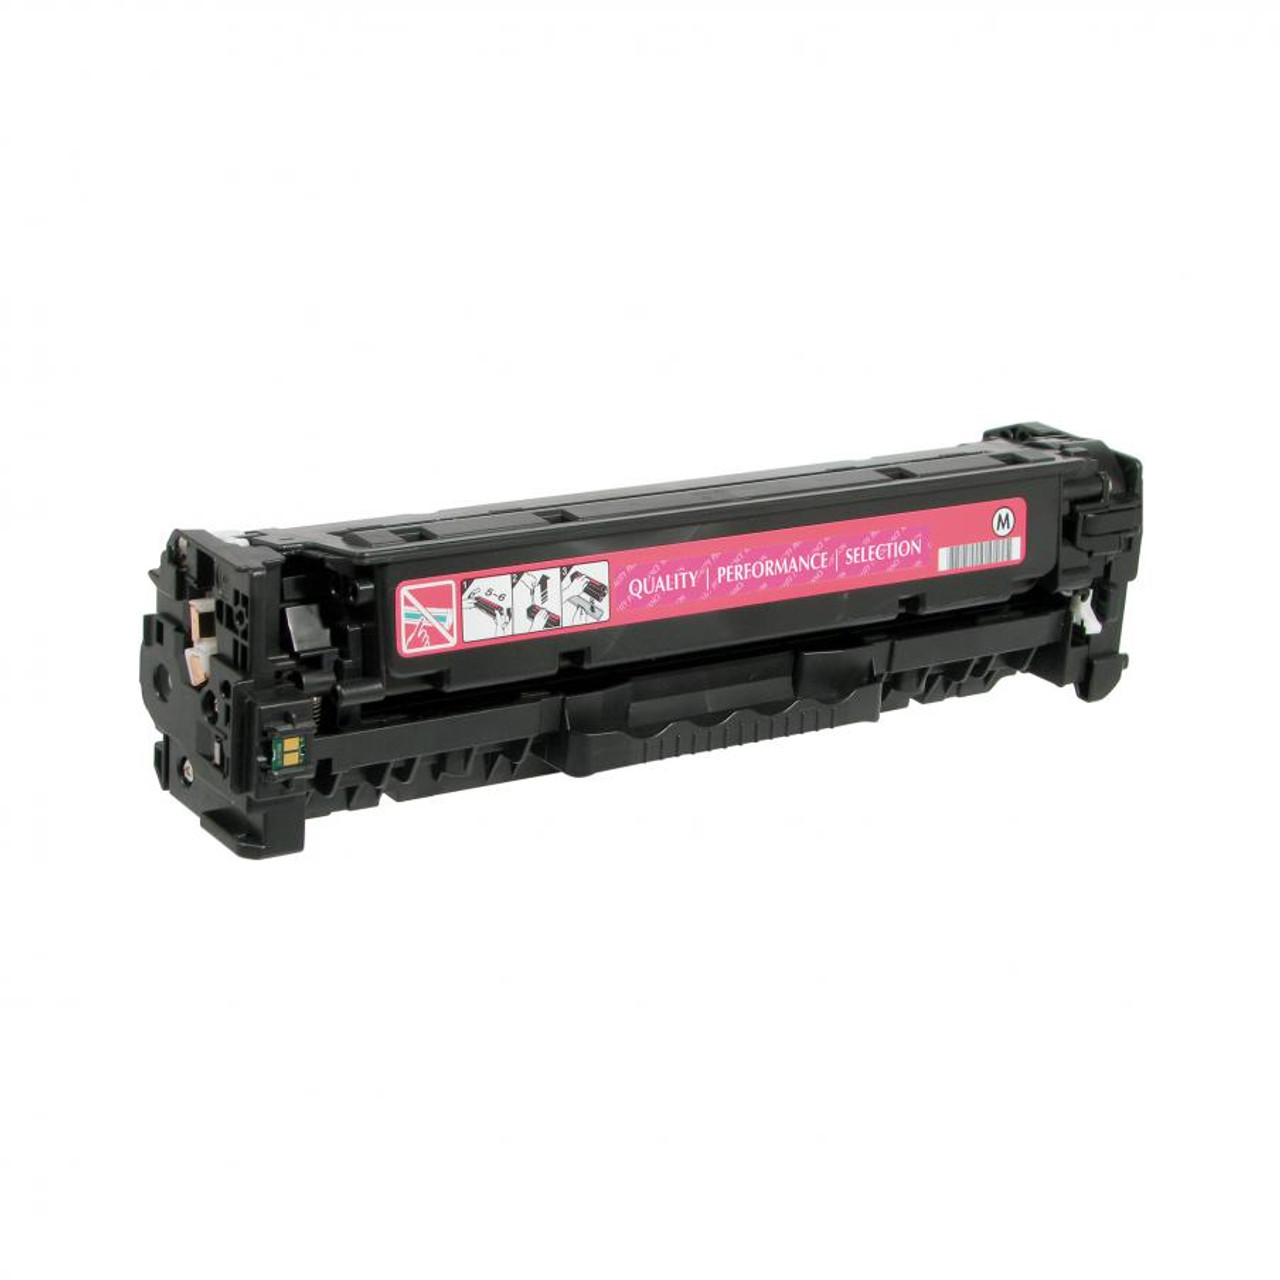 Clover Imaging Remanufactured for HP CE410X(J) 305A CE413A Magenta For use in HP M351 M375 M375NW M451 M451DN M451DW M451NW M475 M475DN  Toner Cartridge 3200 Page Yield